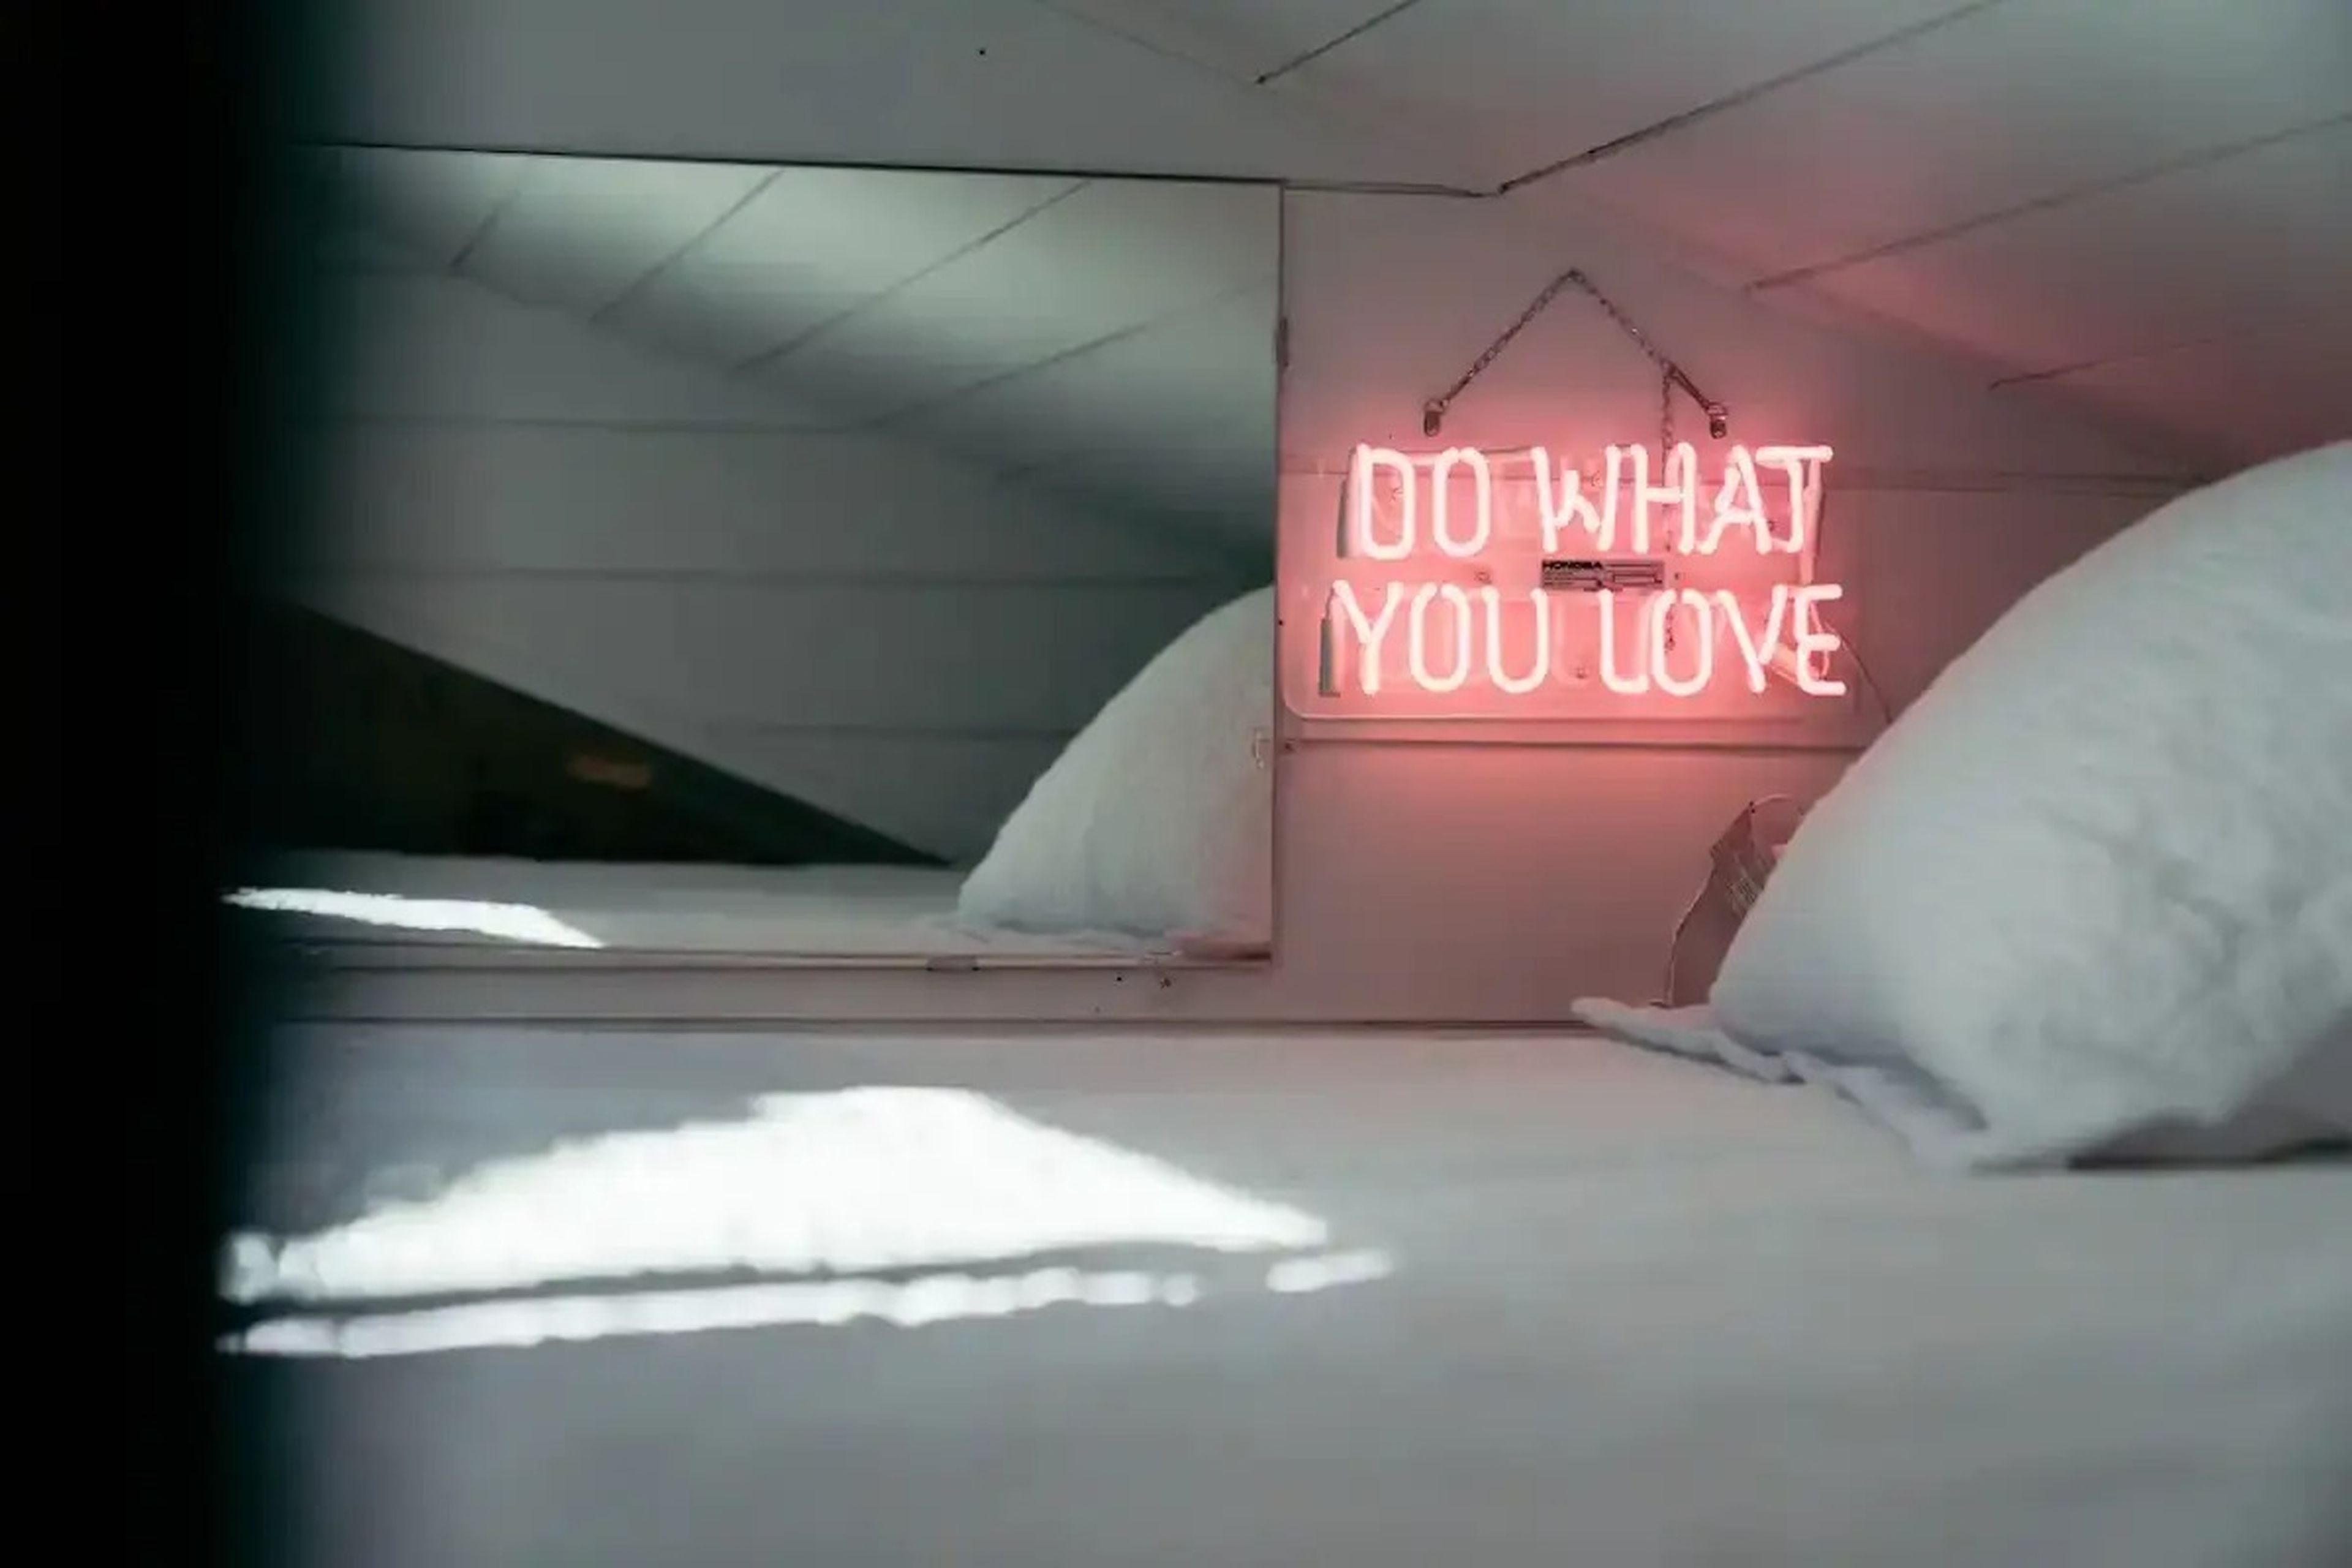 A bed in Ansel Troy's Airbnb with a pink neon sign that reads "Do what you love".